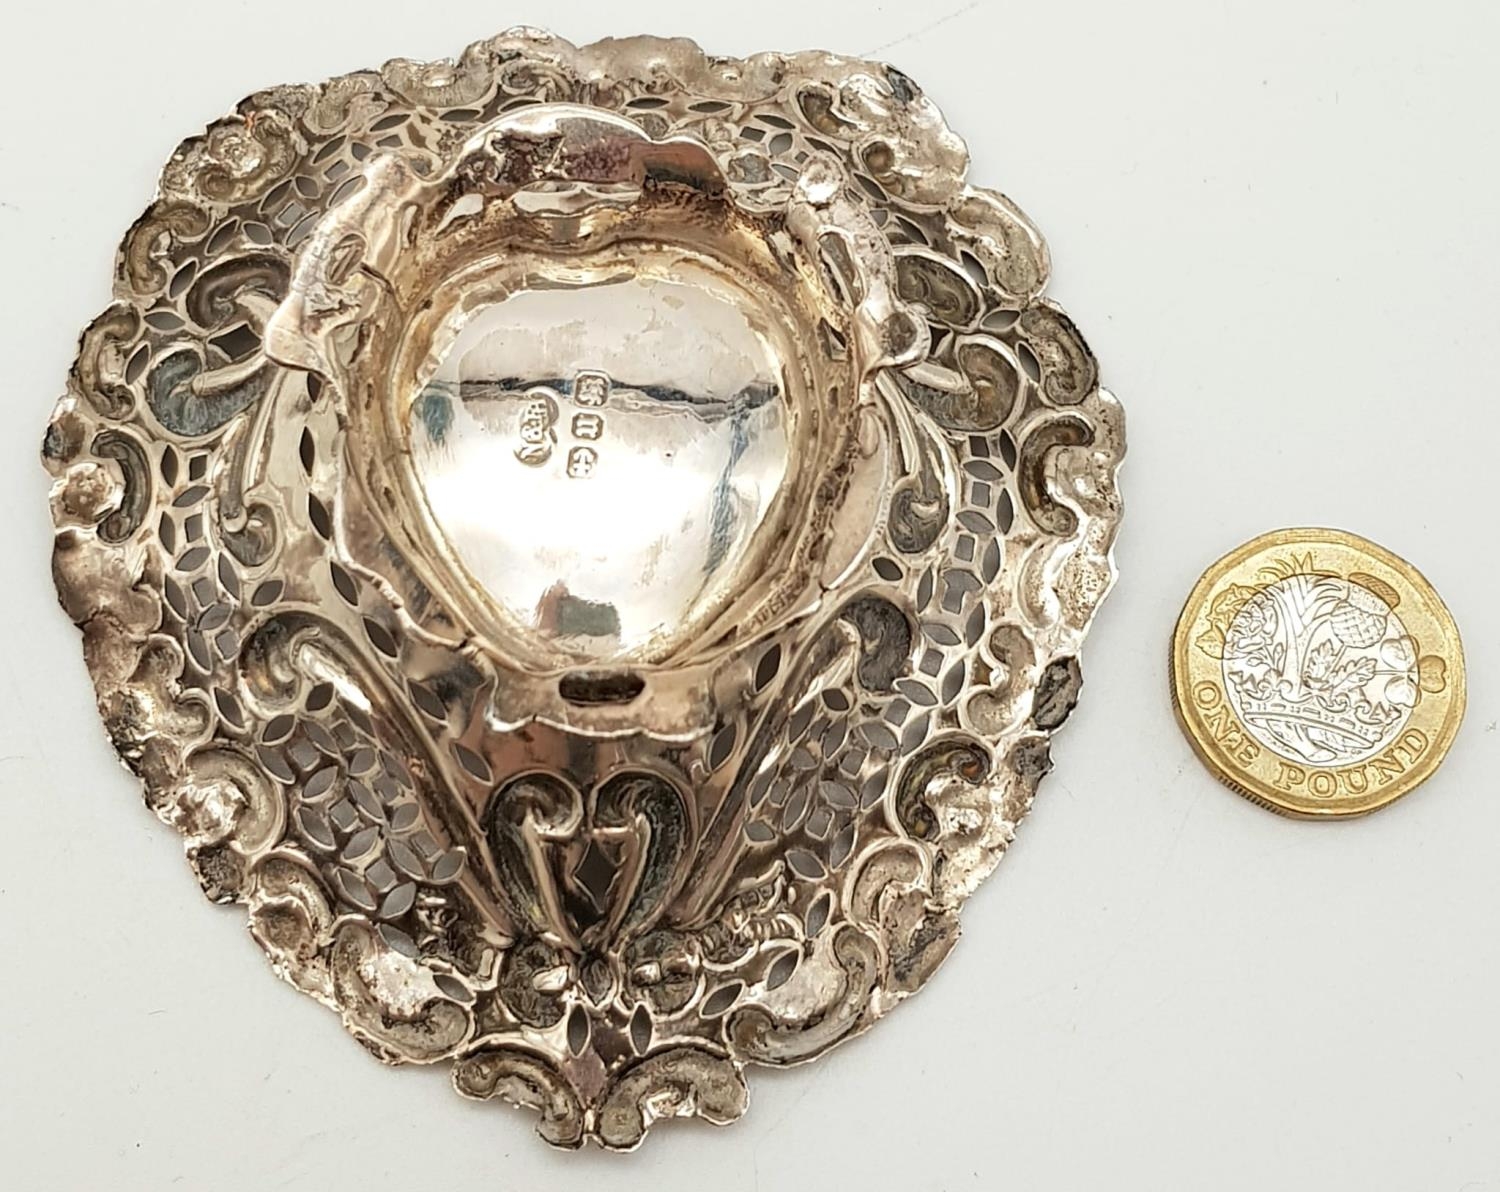 Silver vintage heart shaped bon bon dish, weight 37.5g and size 9x8.5cm approx - Image 3 of 5